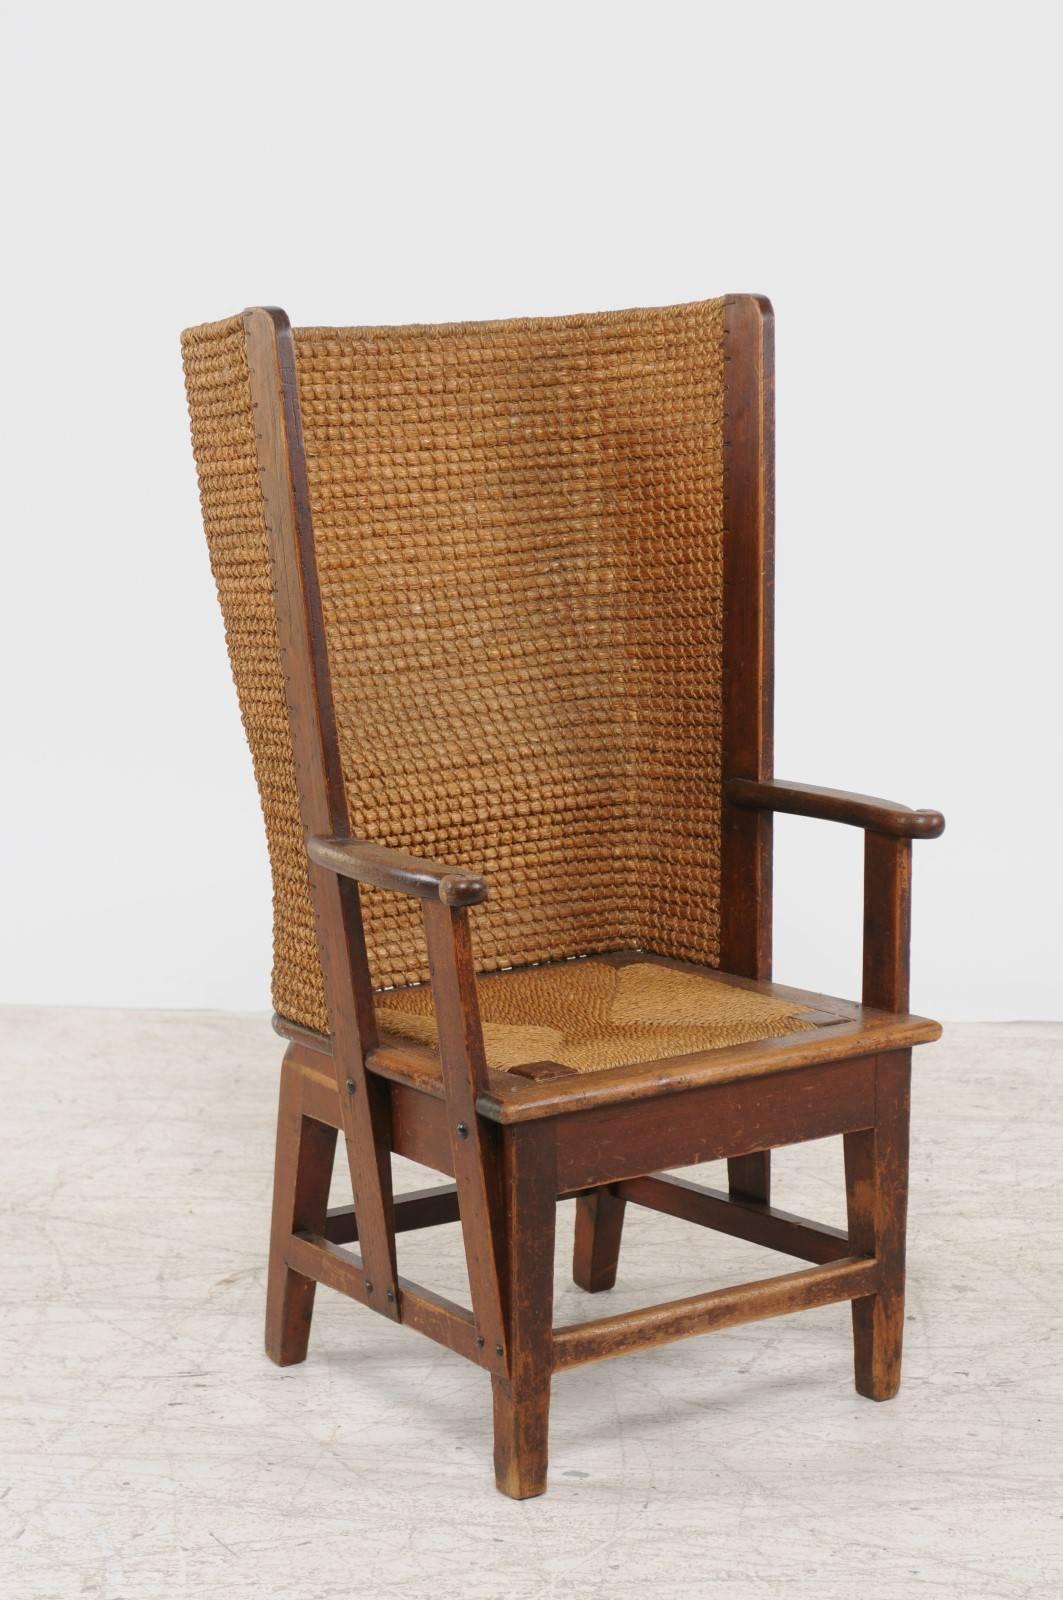 A Scottish orkney chair with handwoven wrap around straw back, wooden arm supports, straight legs and side stretchers from the late 19th century. This wood and straw chair was born in the Orkney Islands near the northern tip of Scotland during the